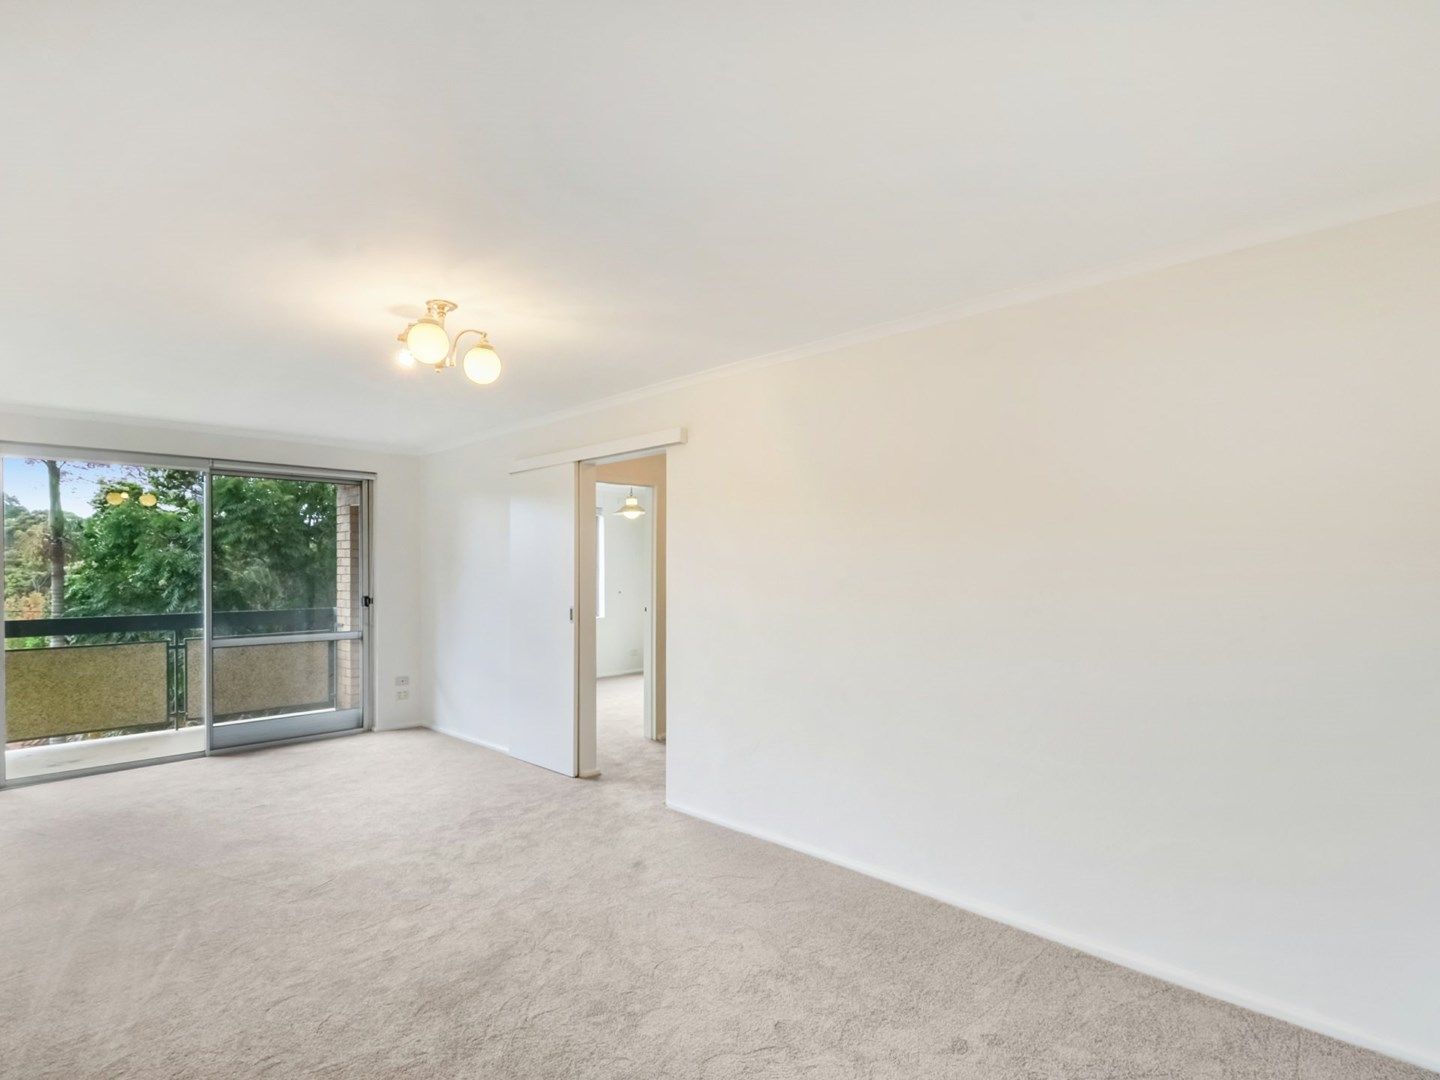 15/424-426 Mowbray Road West, Lane Cove North NSW 2066